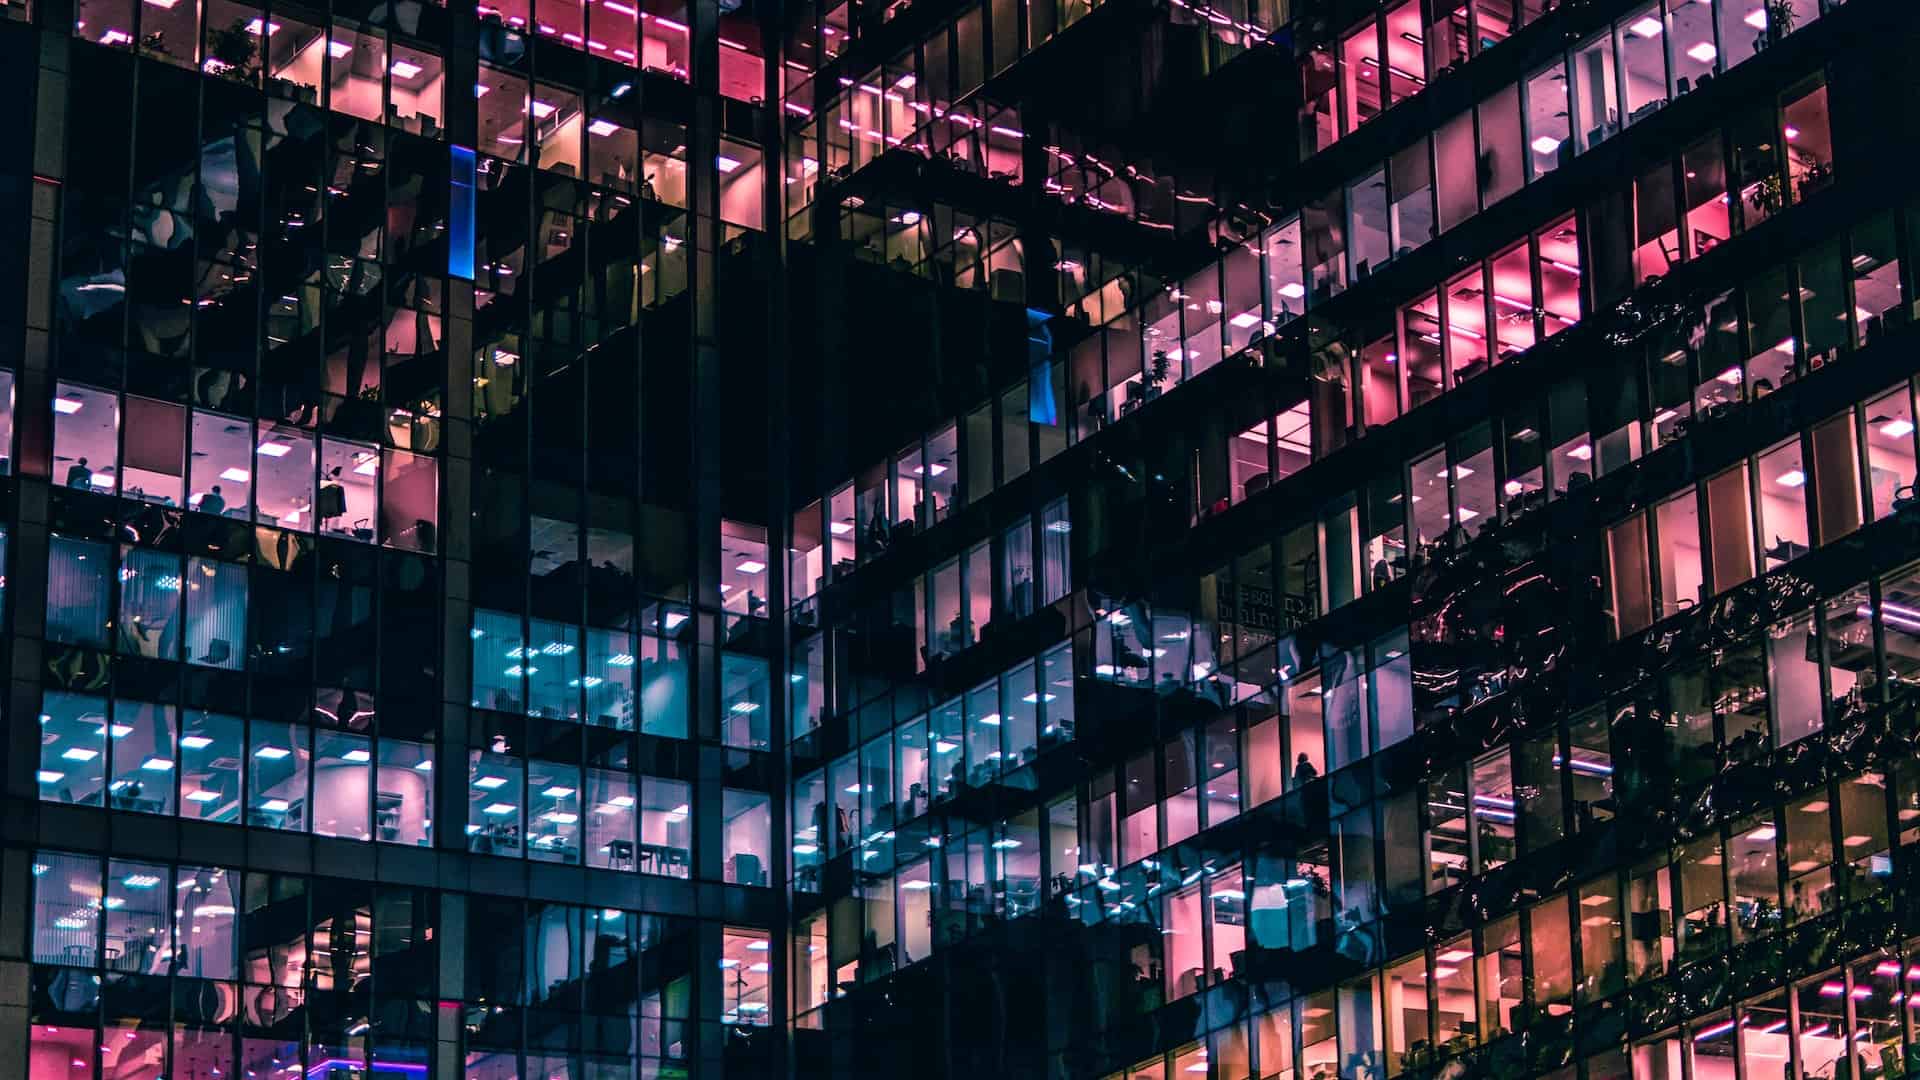 Image showing multiple glass offices illuminated by blue and pink lights